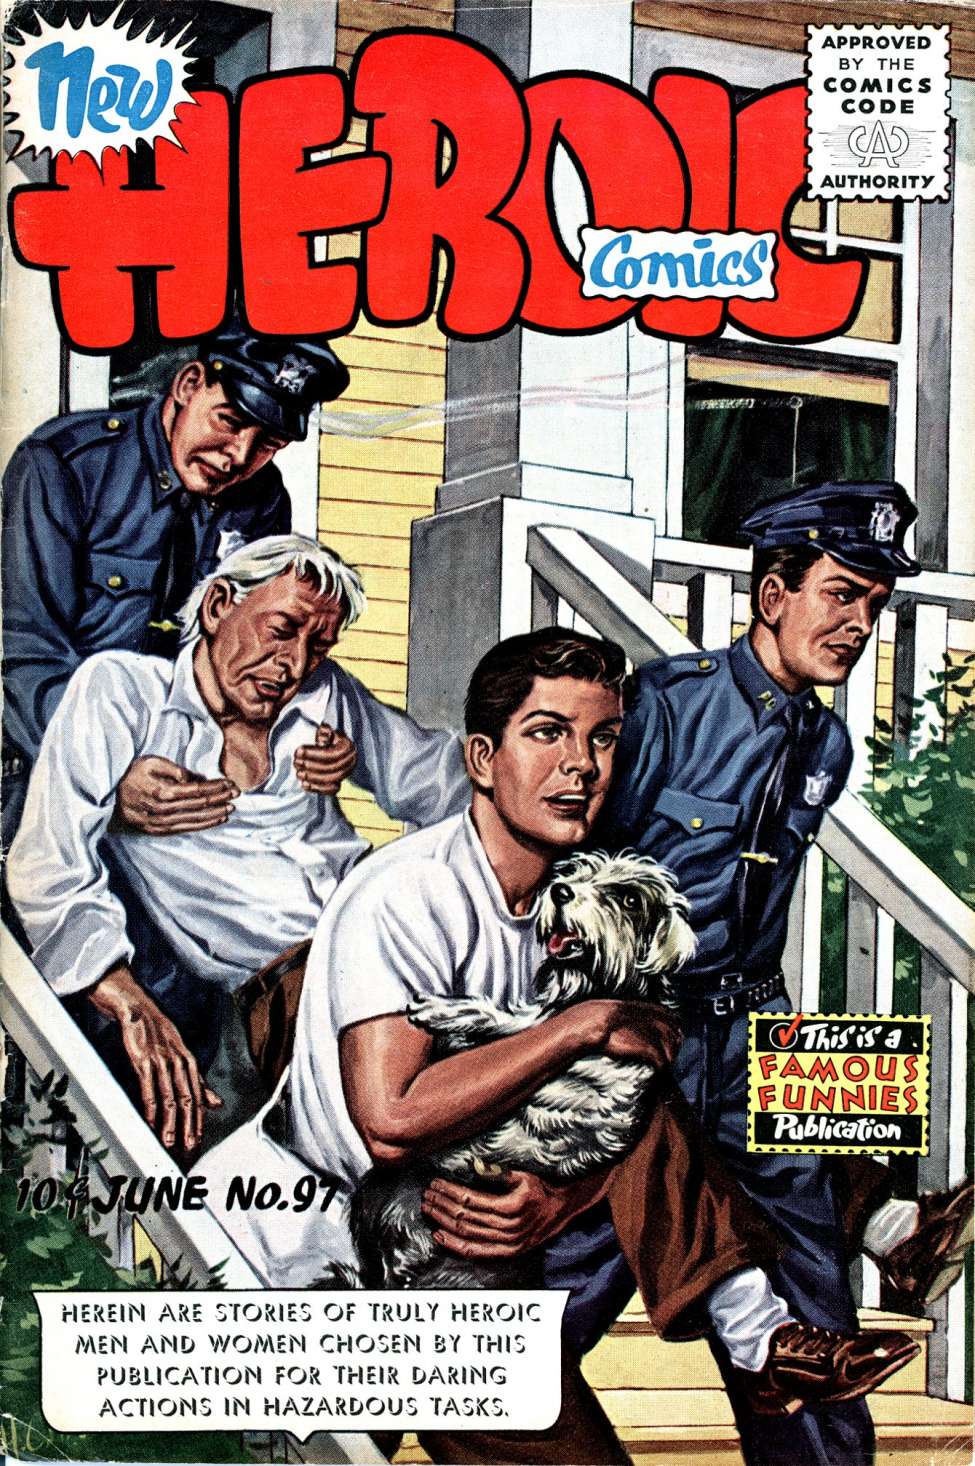 Book Cover For New Heroic Comics 97